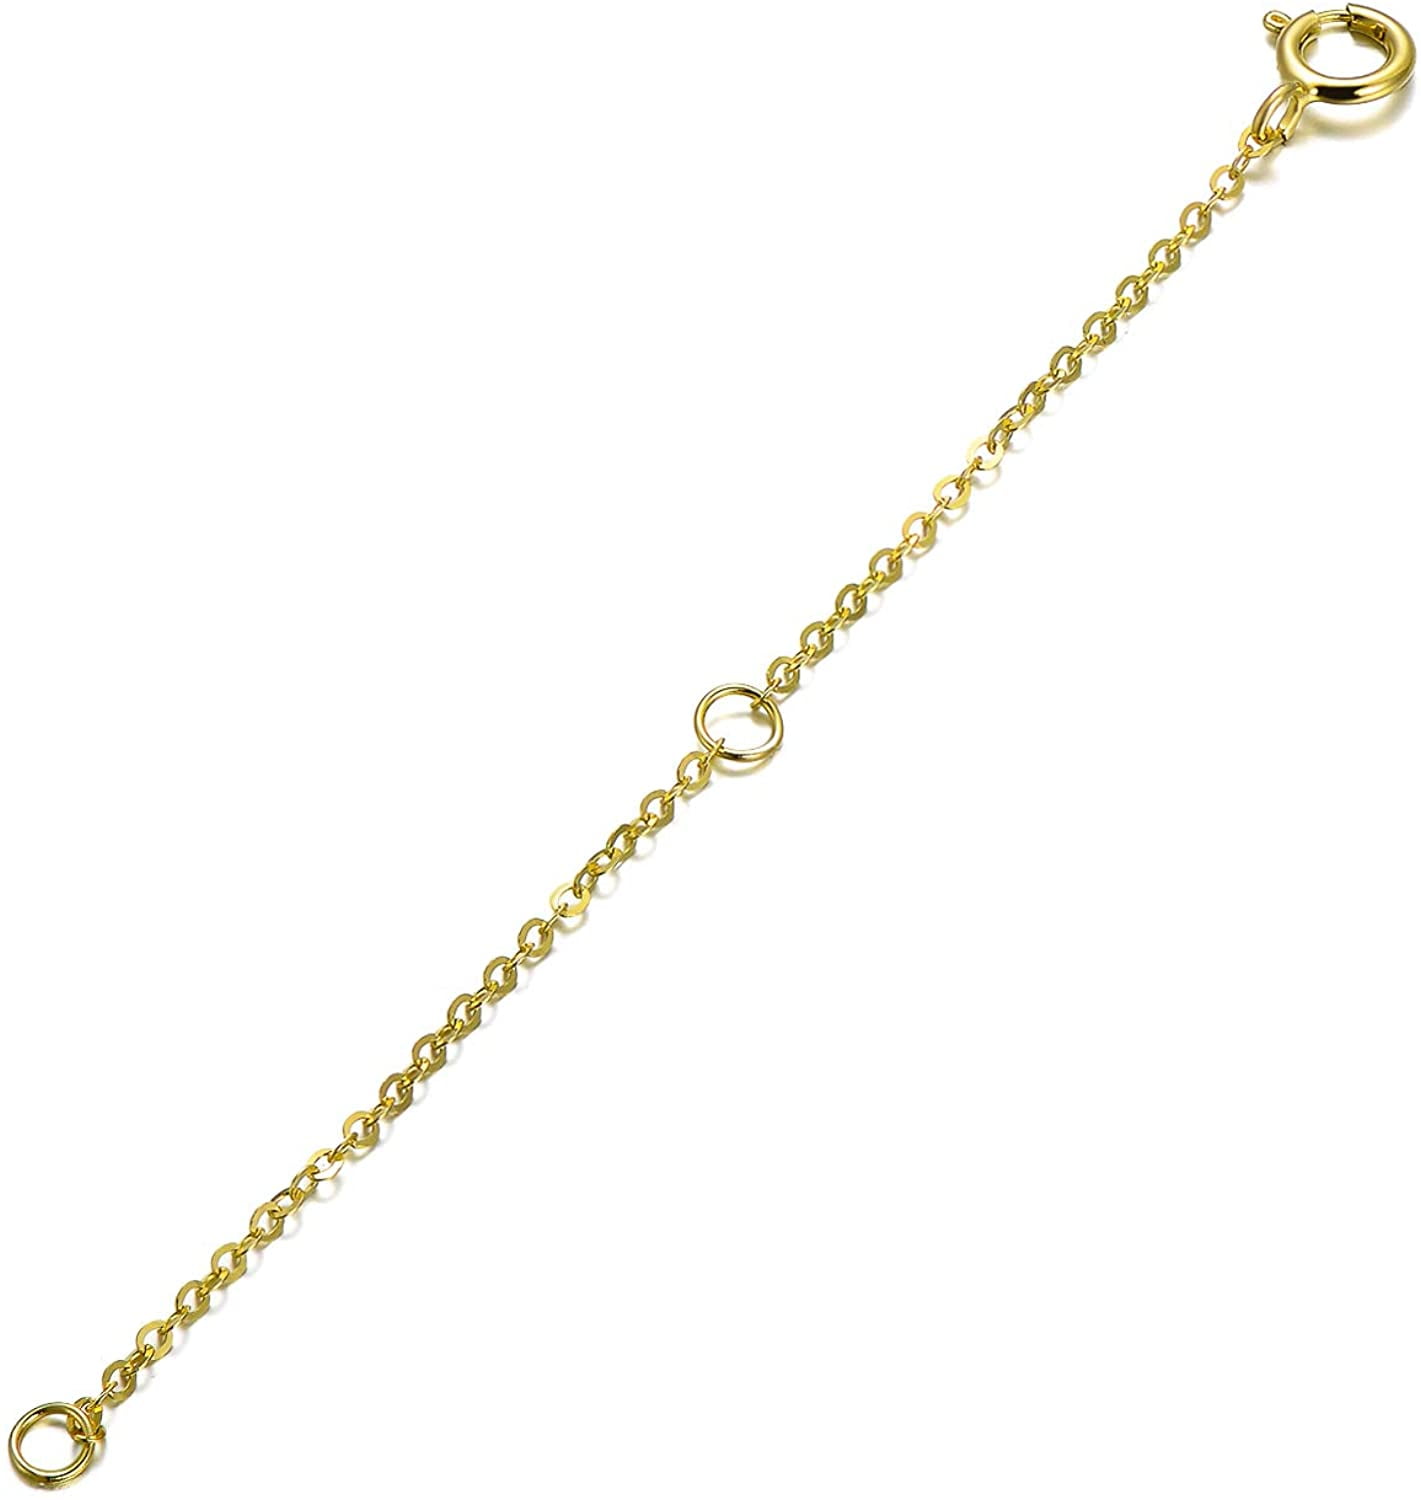  Sarkoyar 5Pcs Chain Extenders for Necklaces,Gold